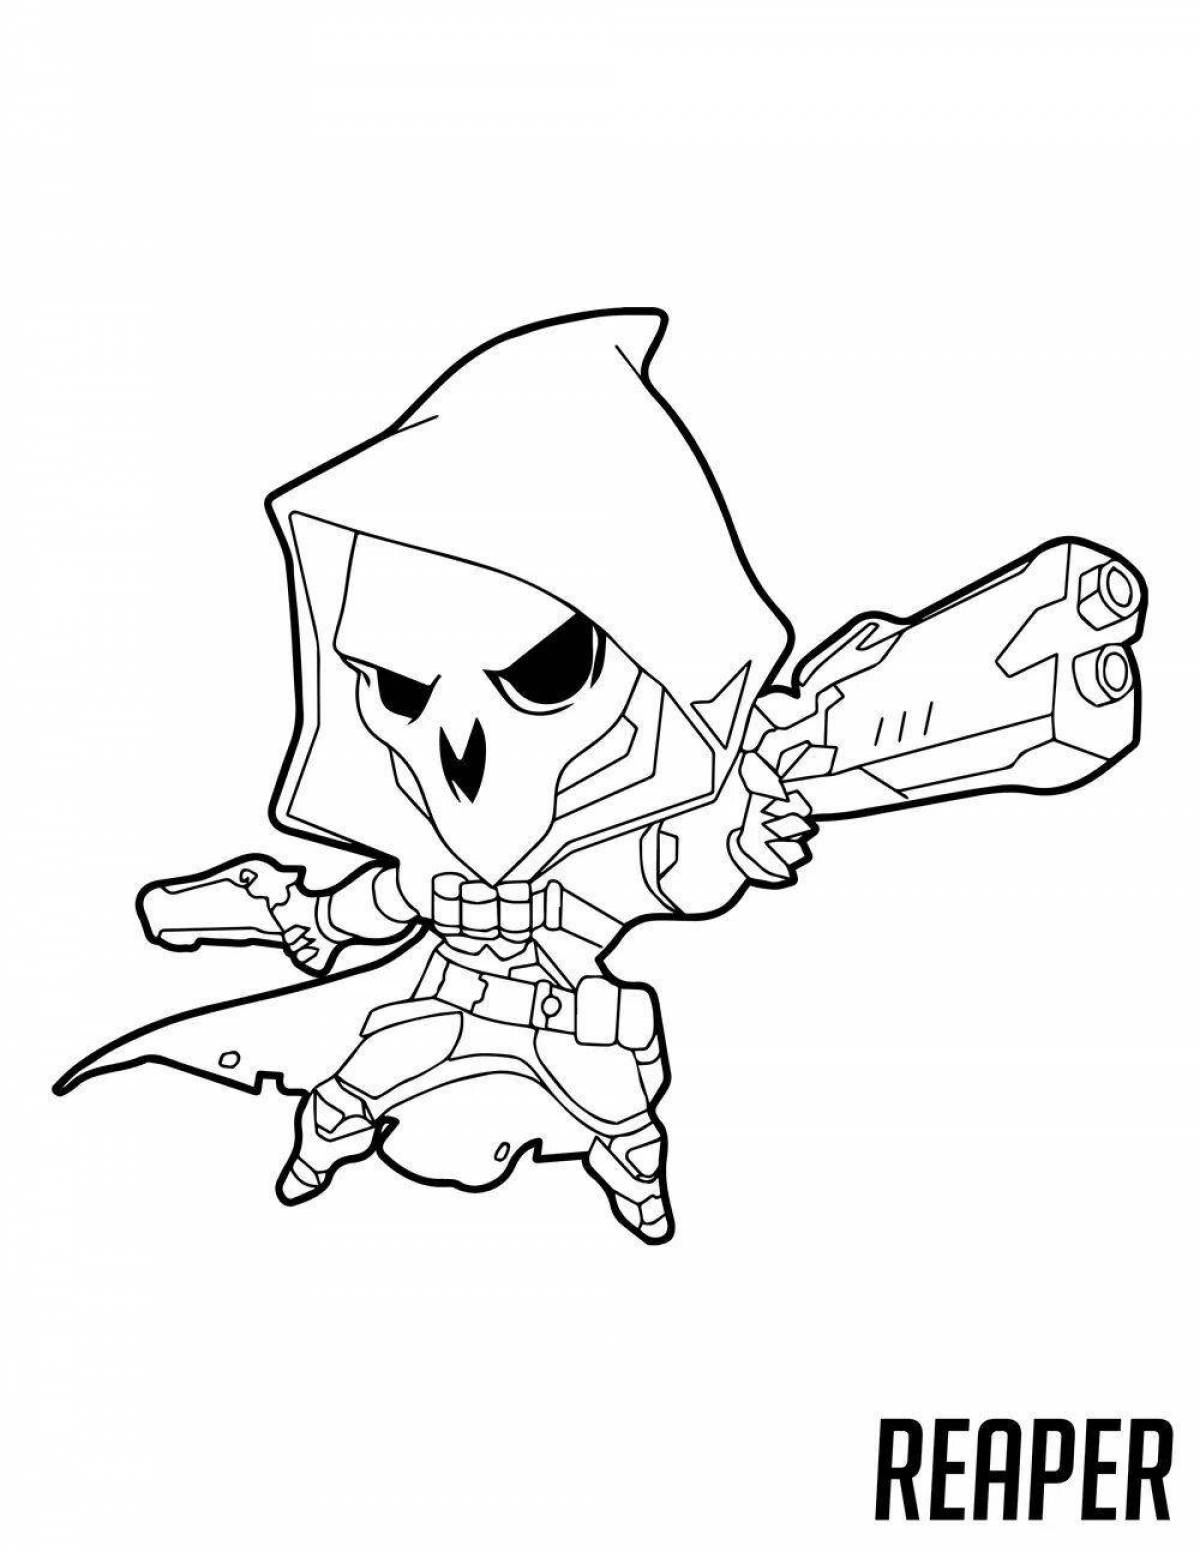 Playful overwatch coloring page